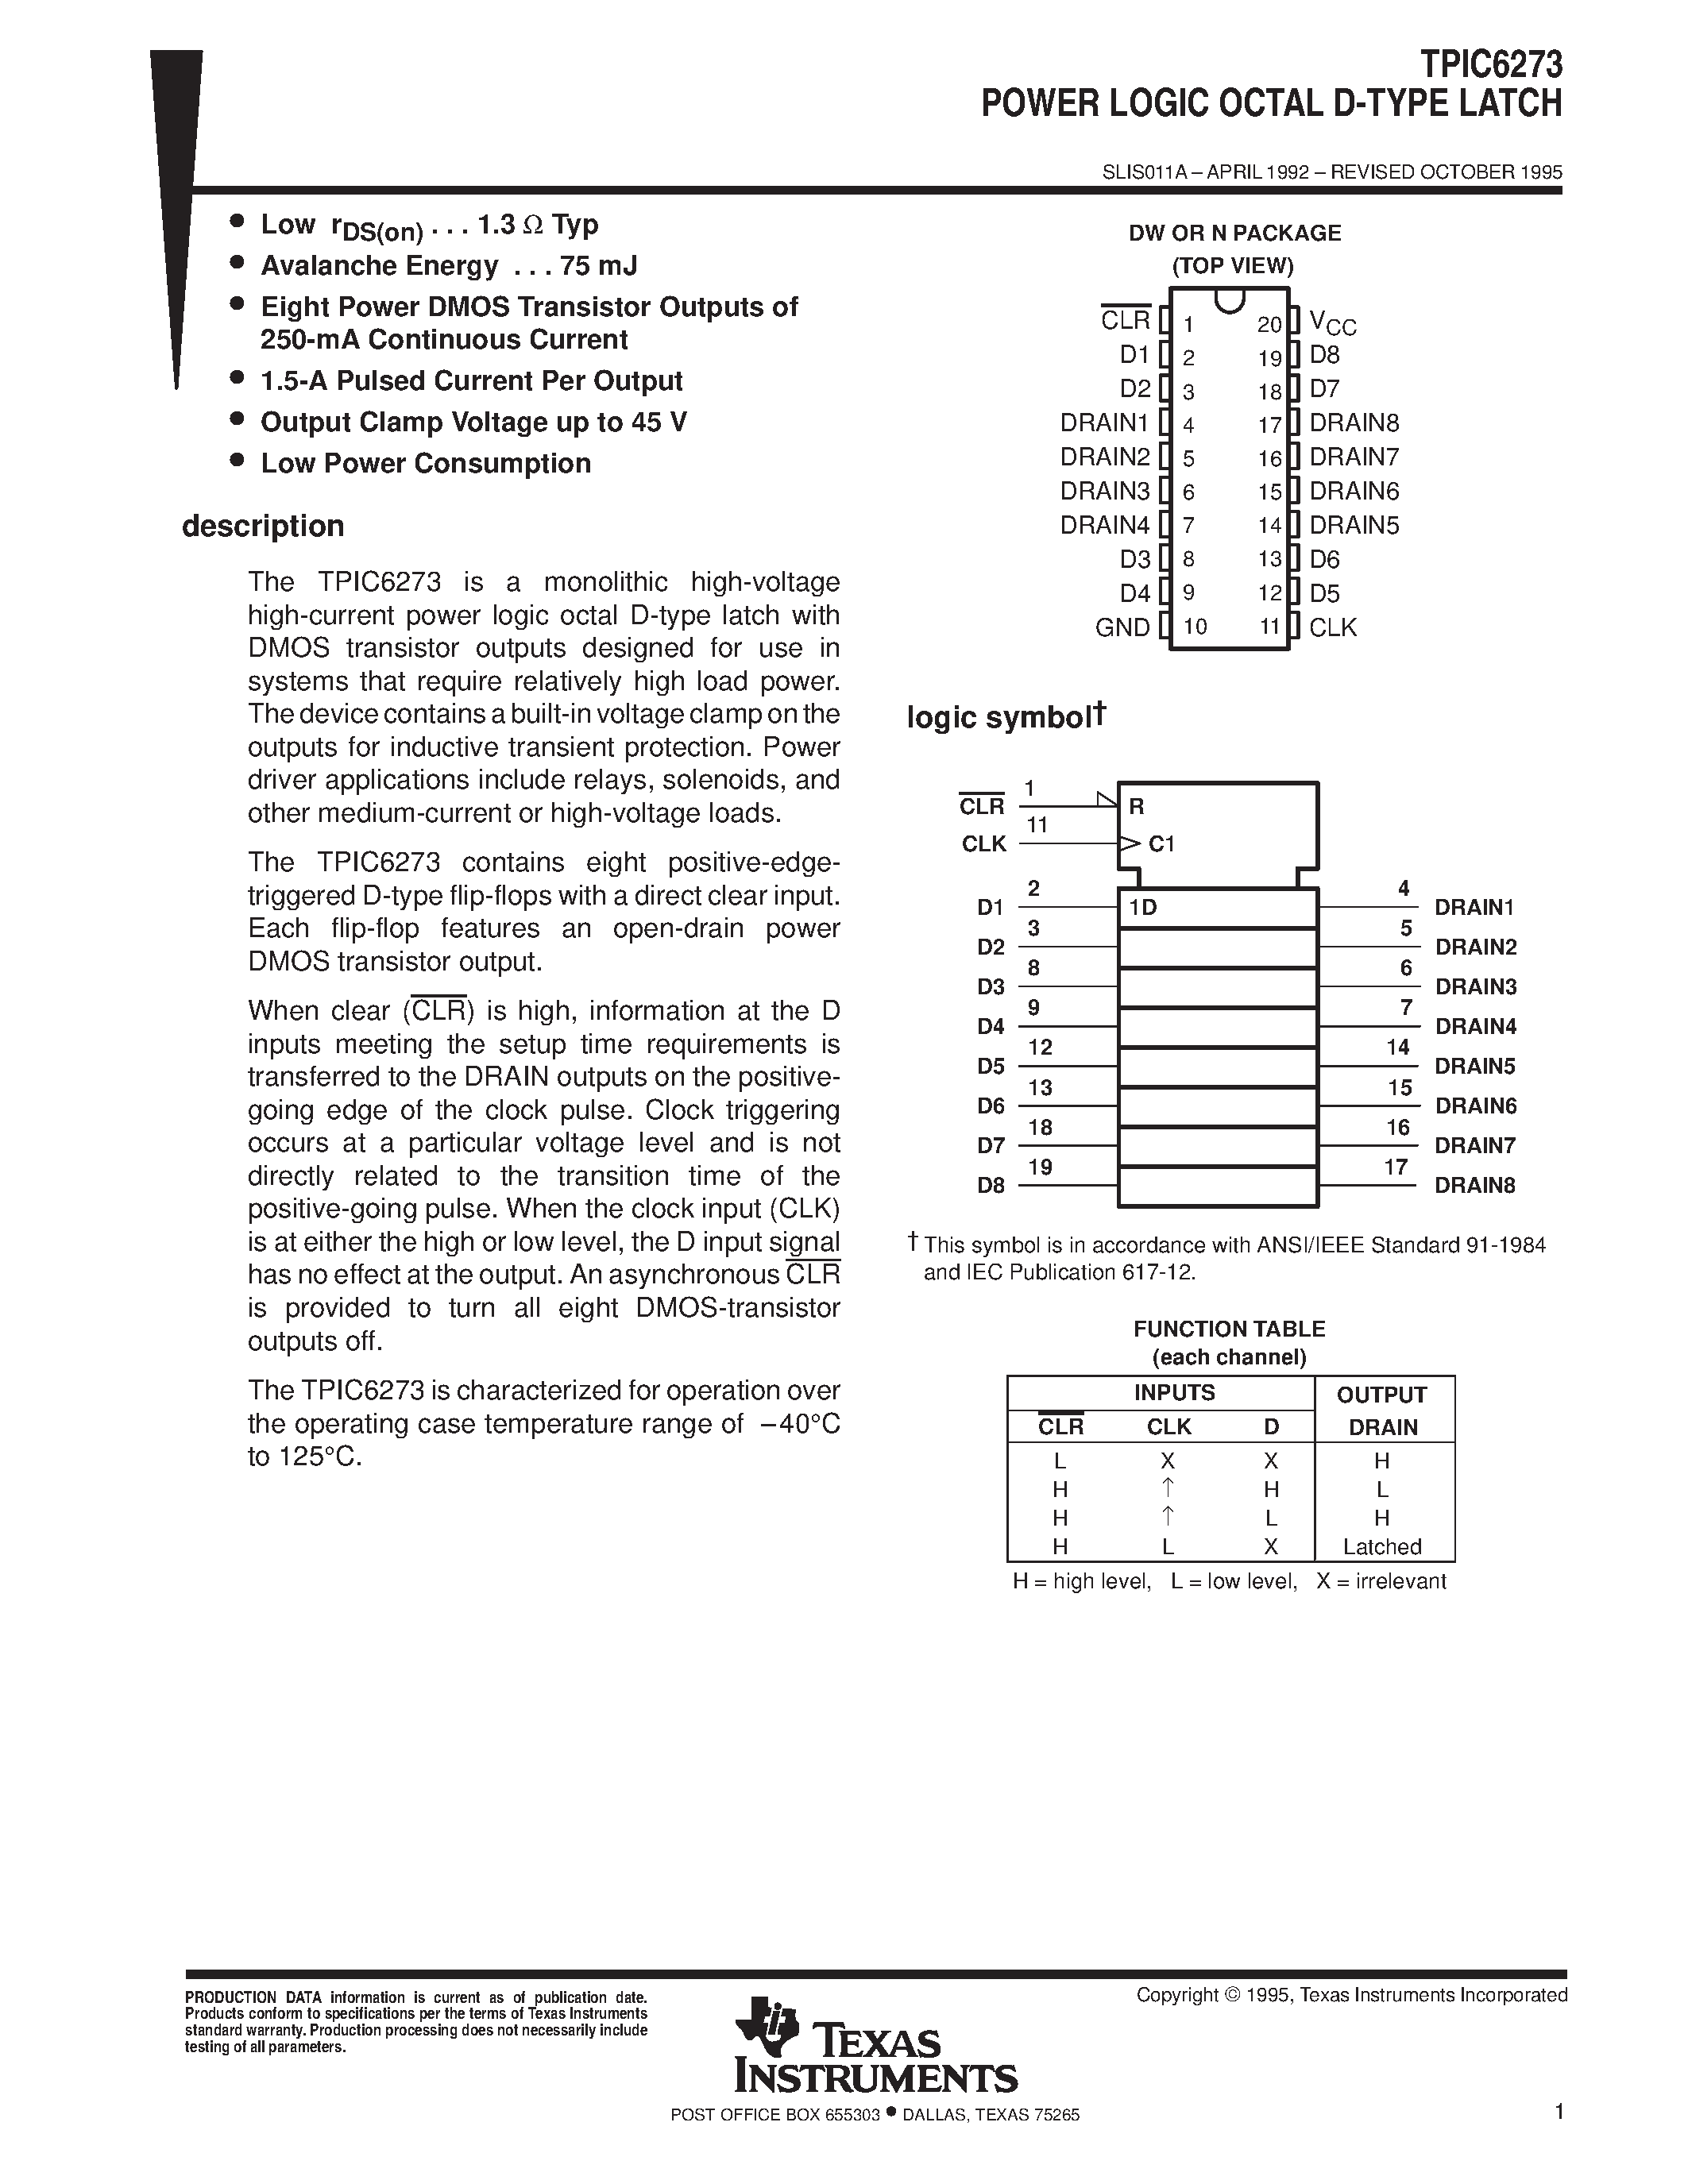 Datasheet TPIC6273 - POWER LOGIC OCTAL D-TYPE LATCH page 1